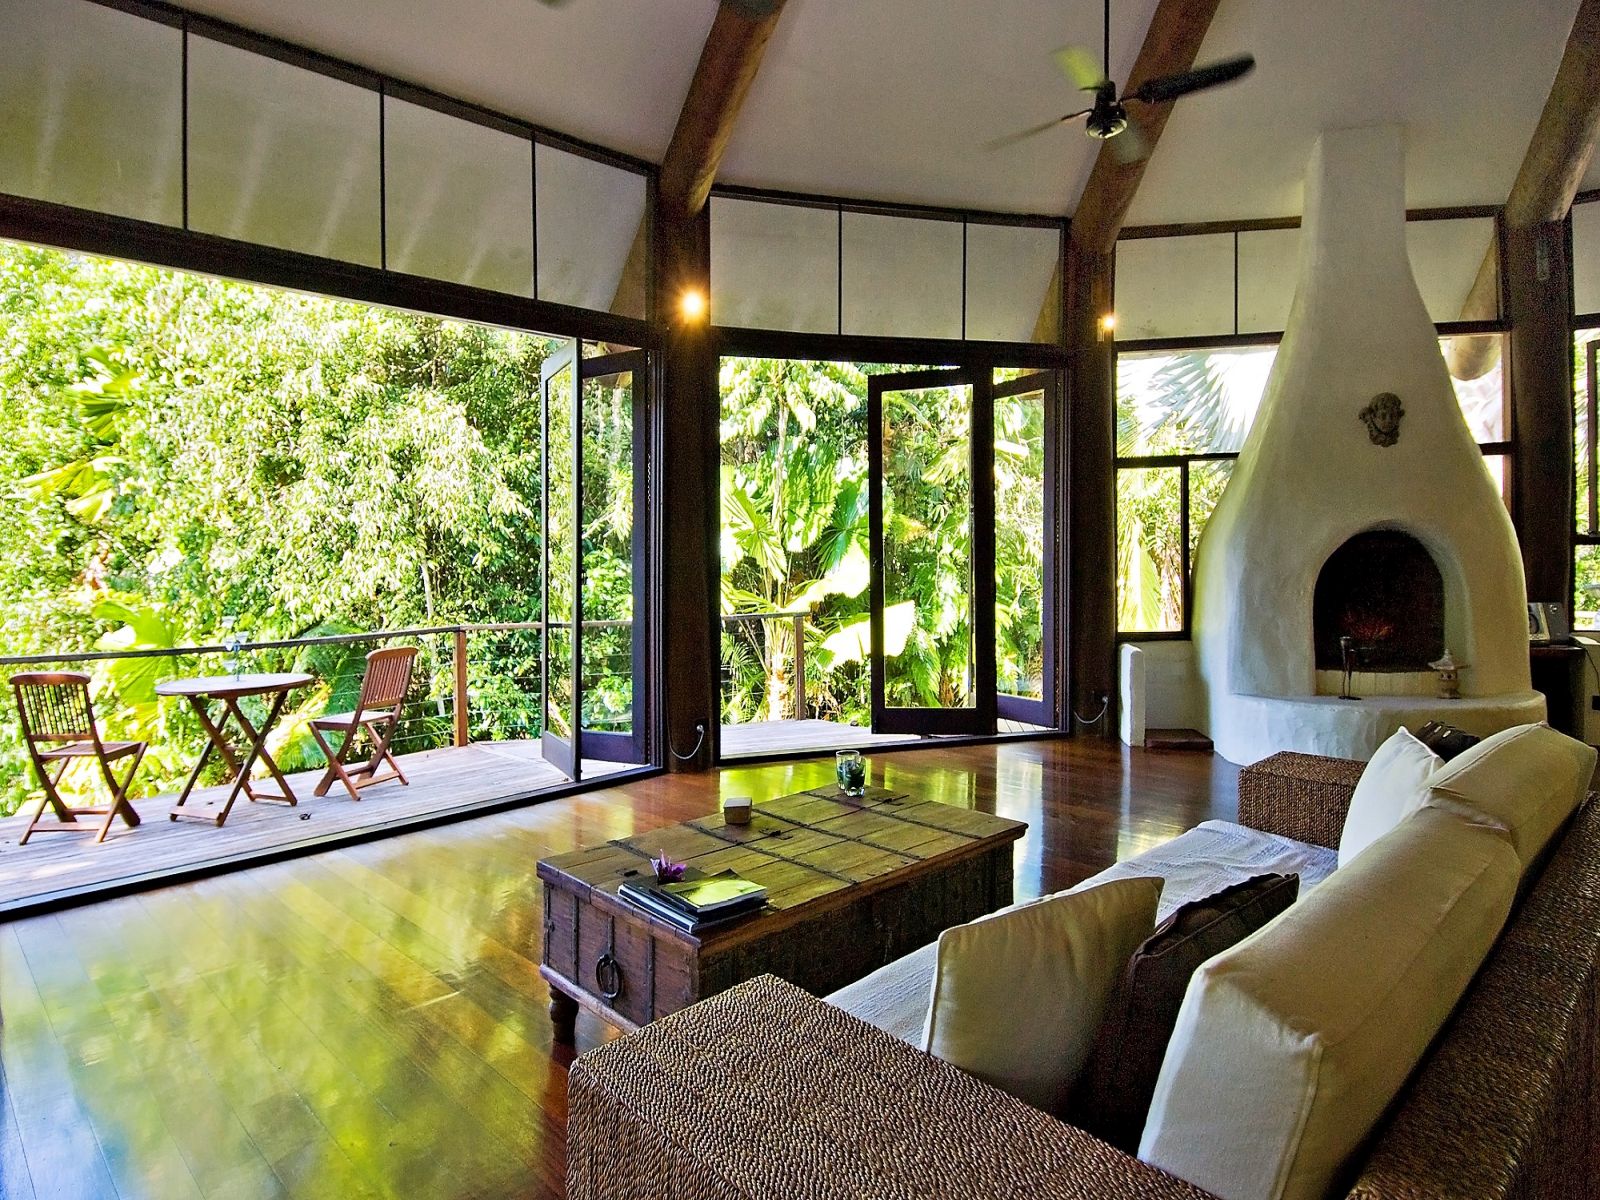 Fireplace and terrace to the outdoors